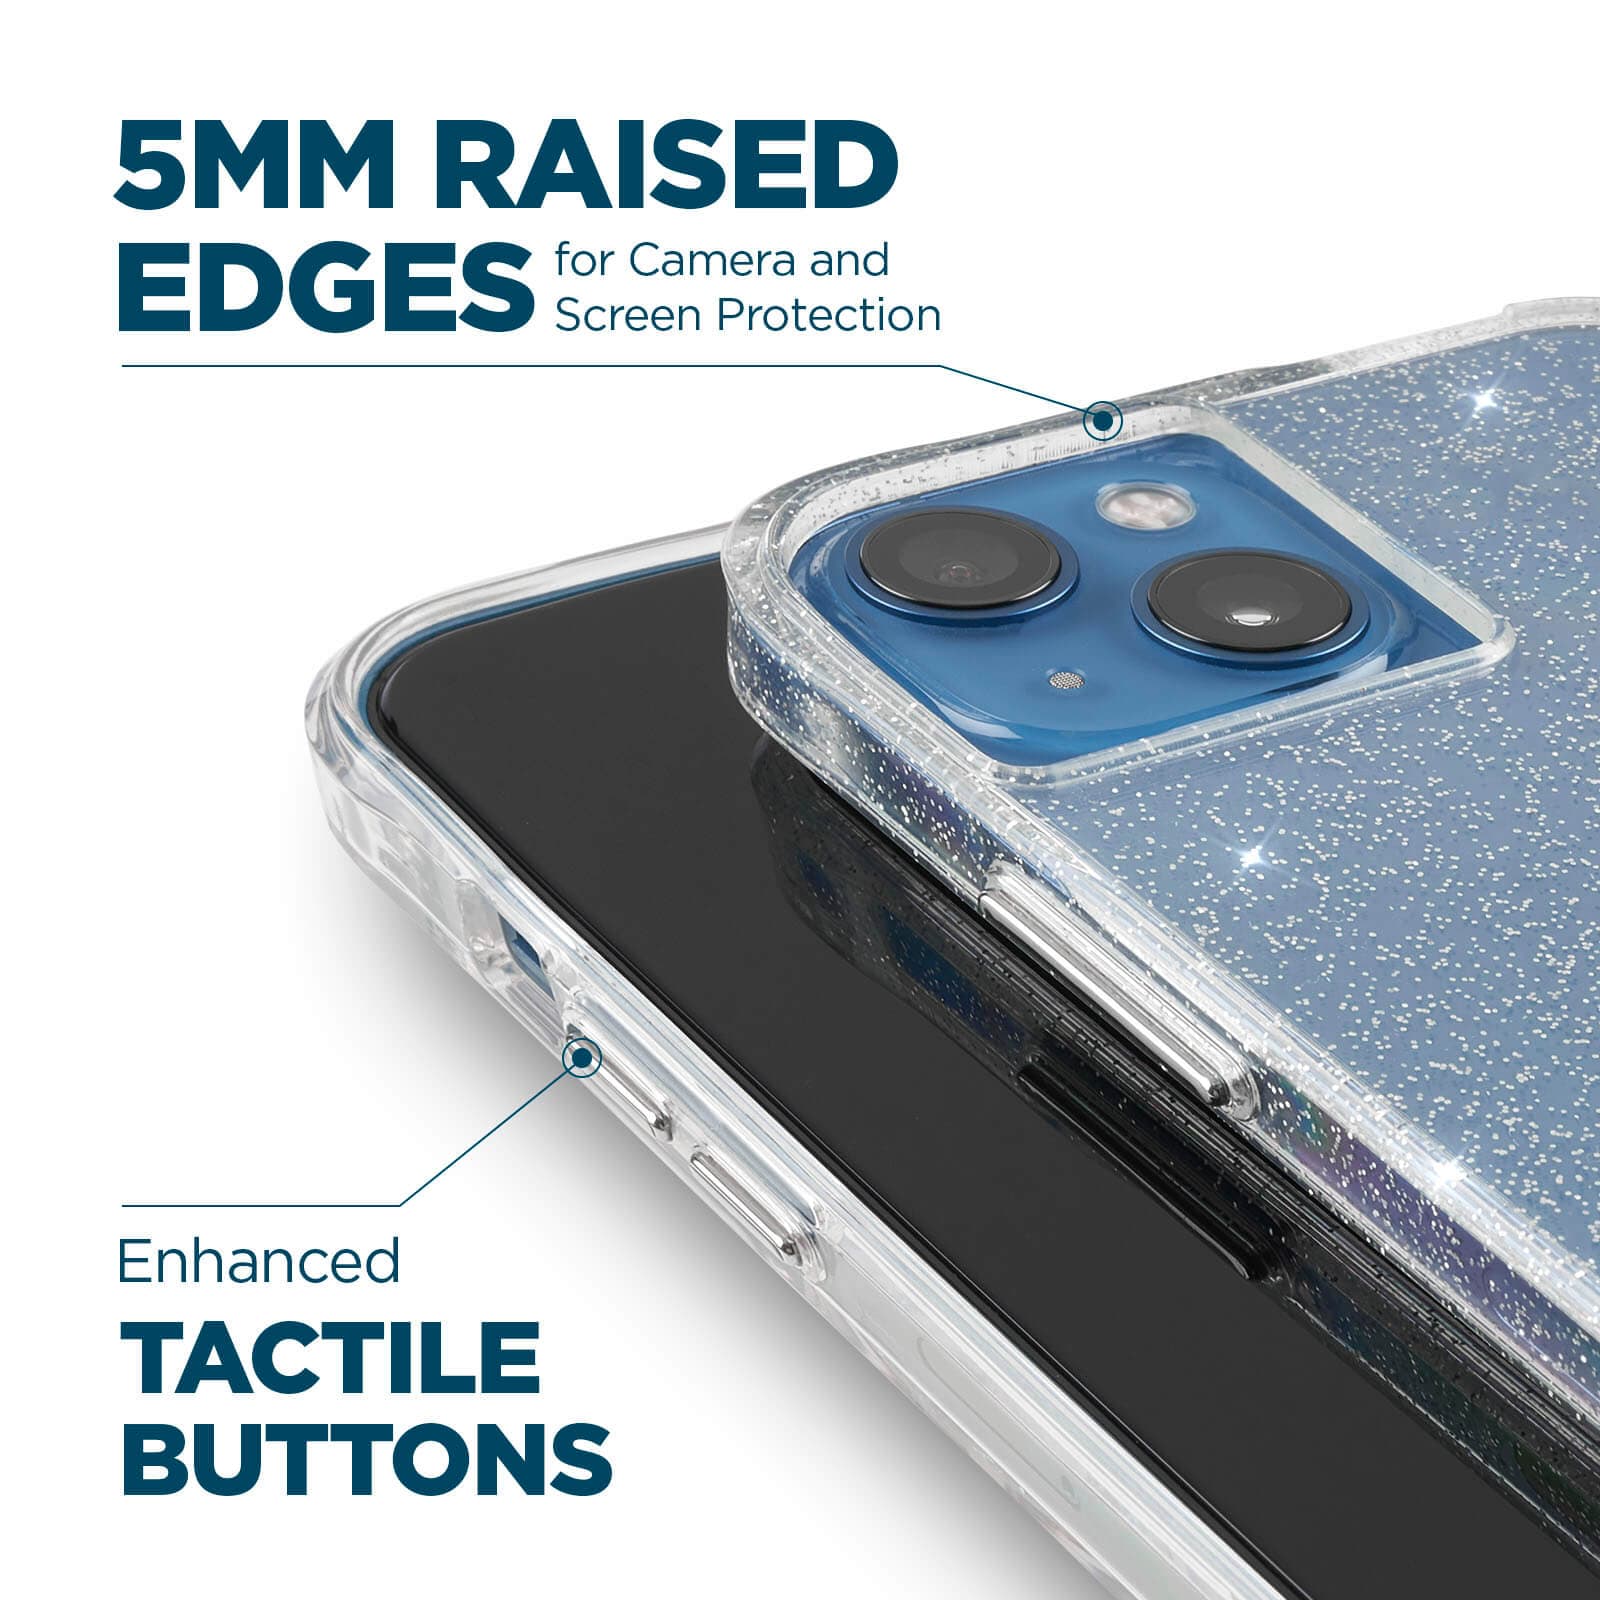 5mm raised edges for camera and screen protection. Enhanced tactile buttons. color::Clear